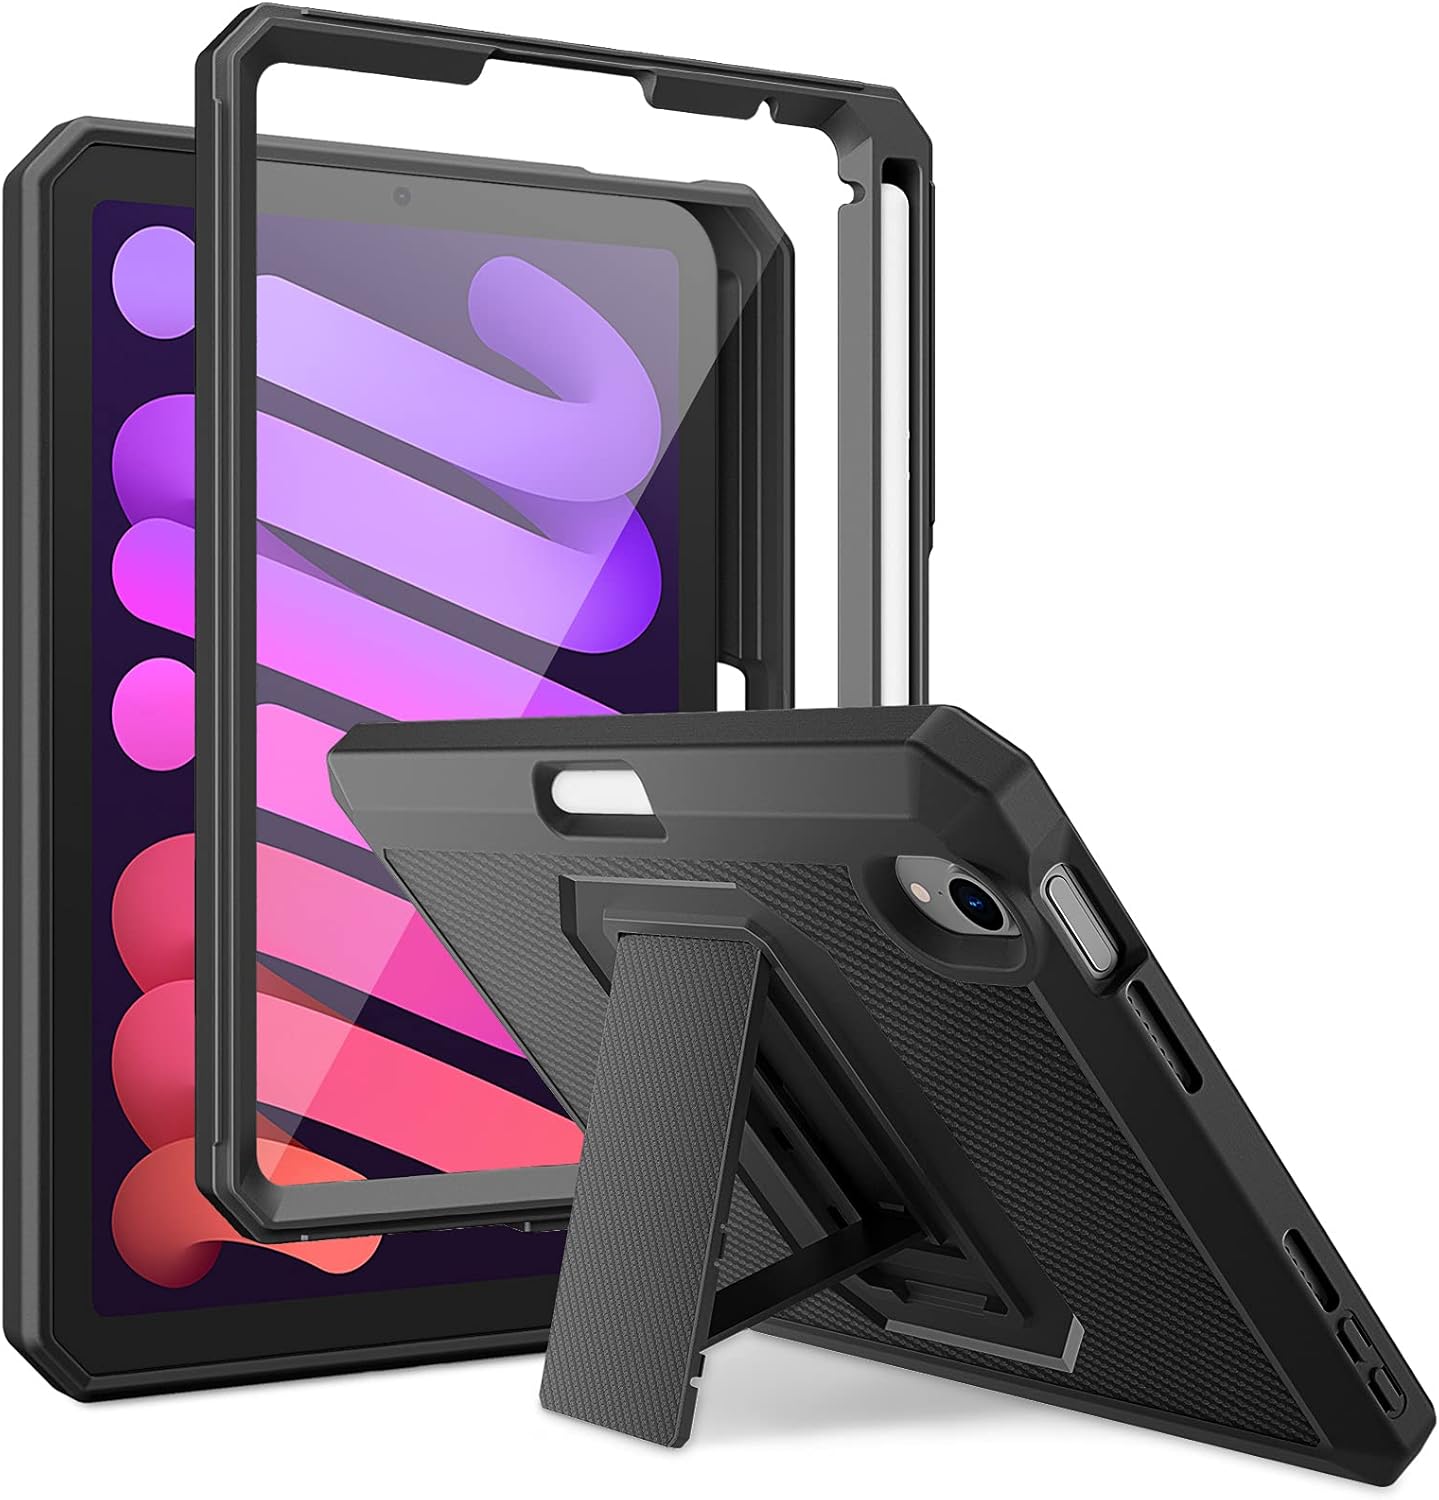 DTTO Shockproof Case for iPad Mini 6